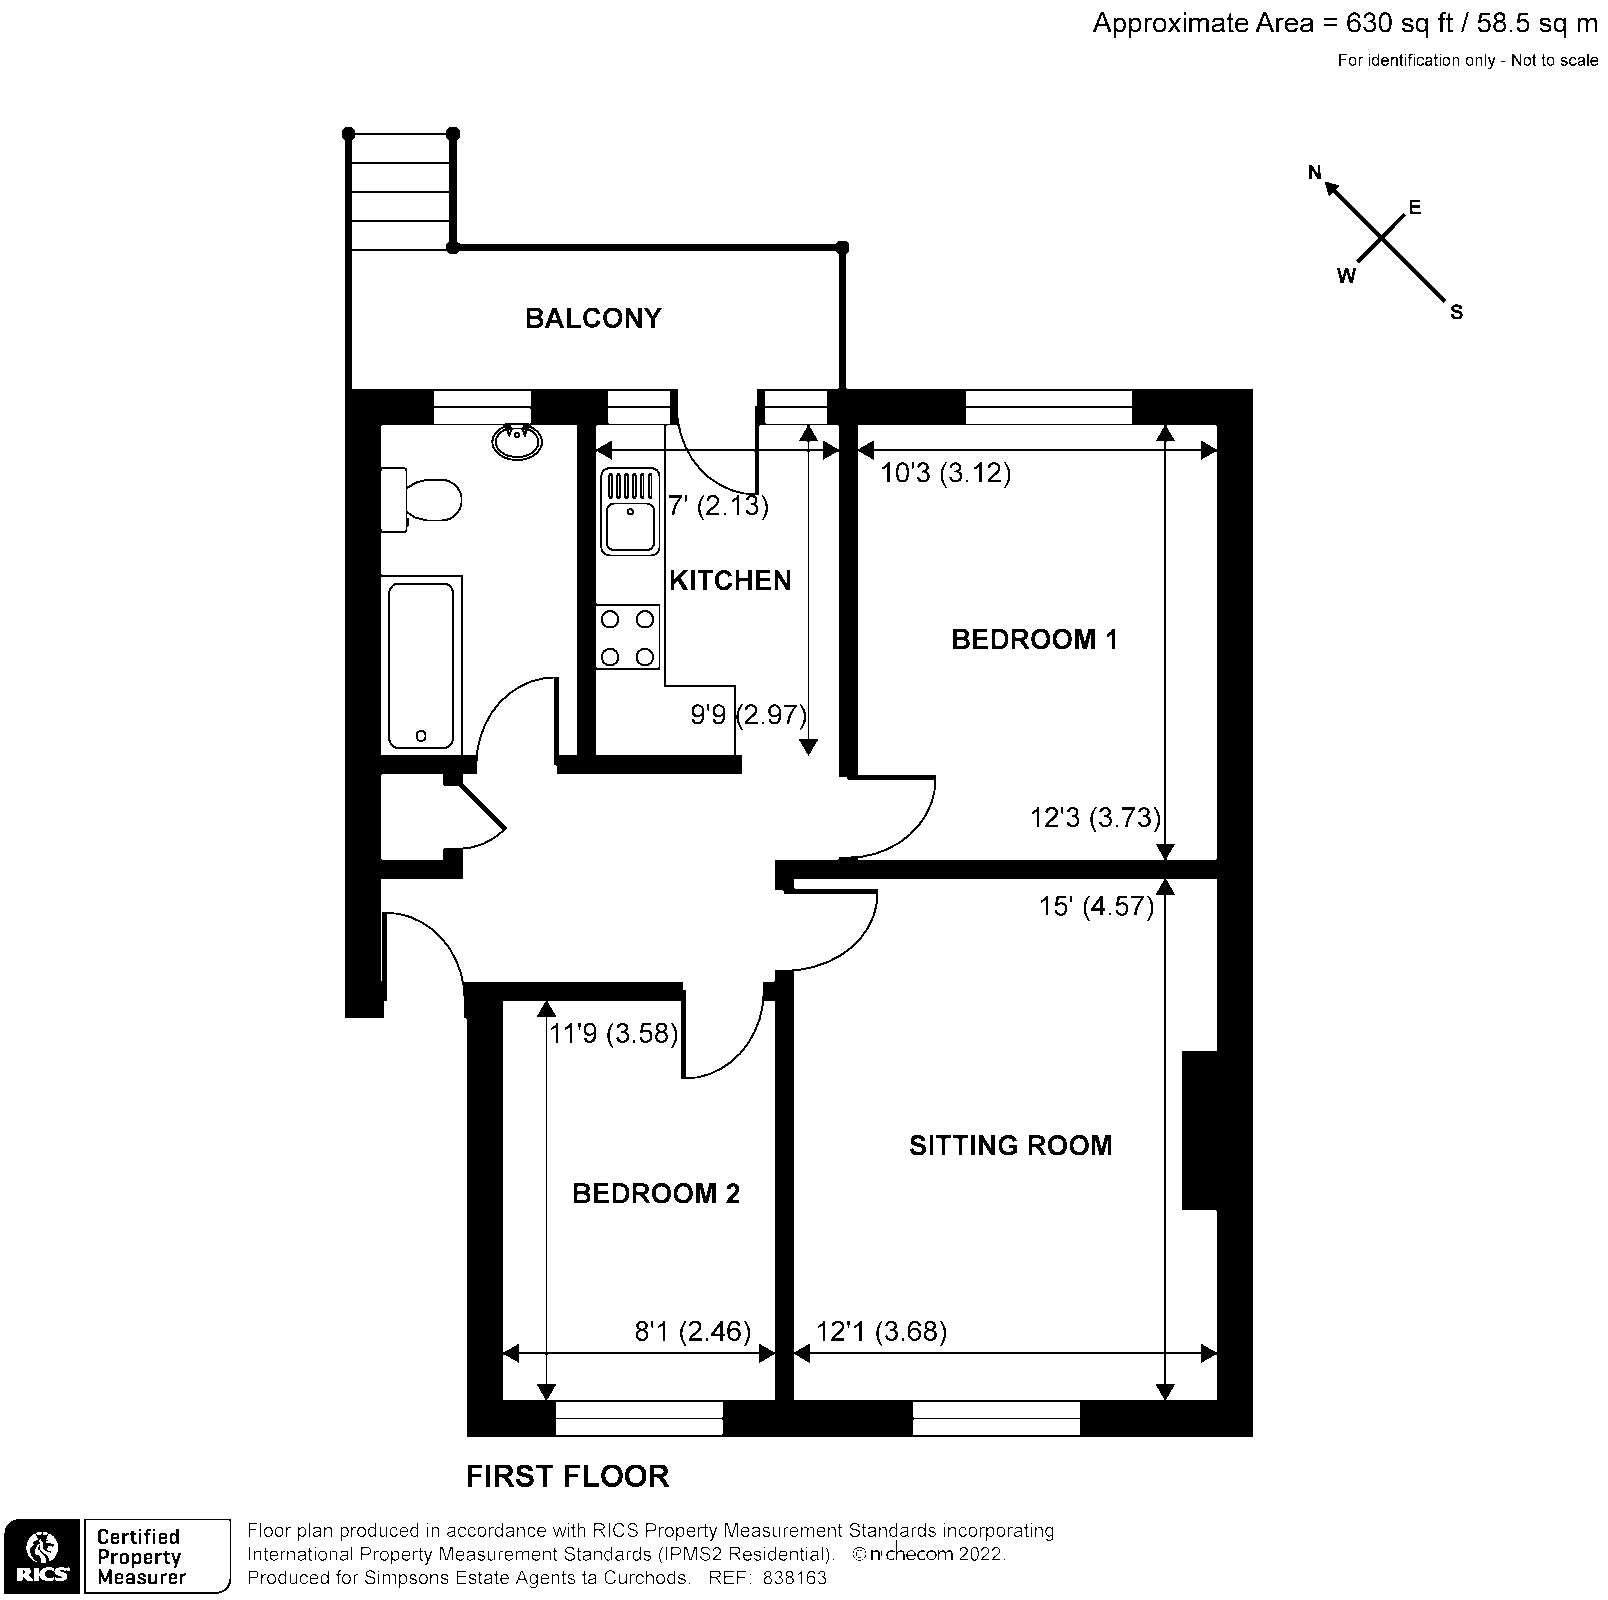 Indians at UK - Floor Plans and Tours